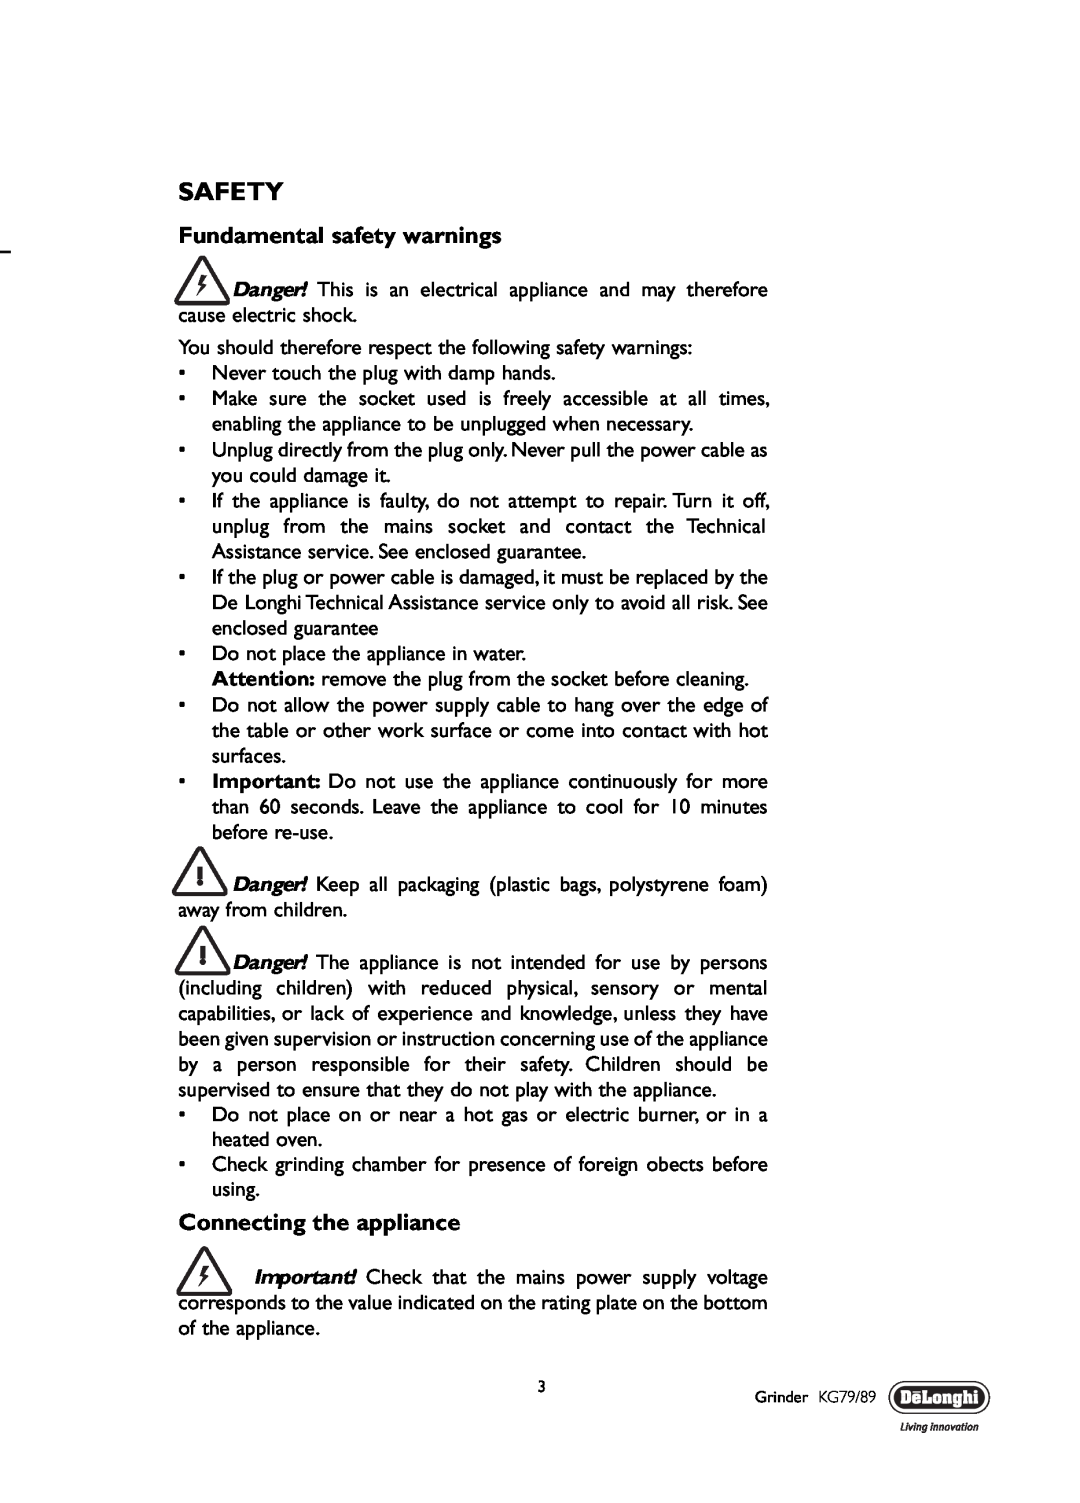 DeLonghi KG 89, KG 79 manual Safety, Fundamental safety warnings, Connecting the appliance 